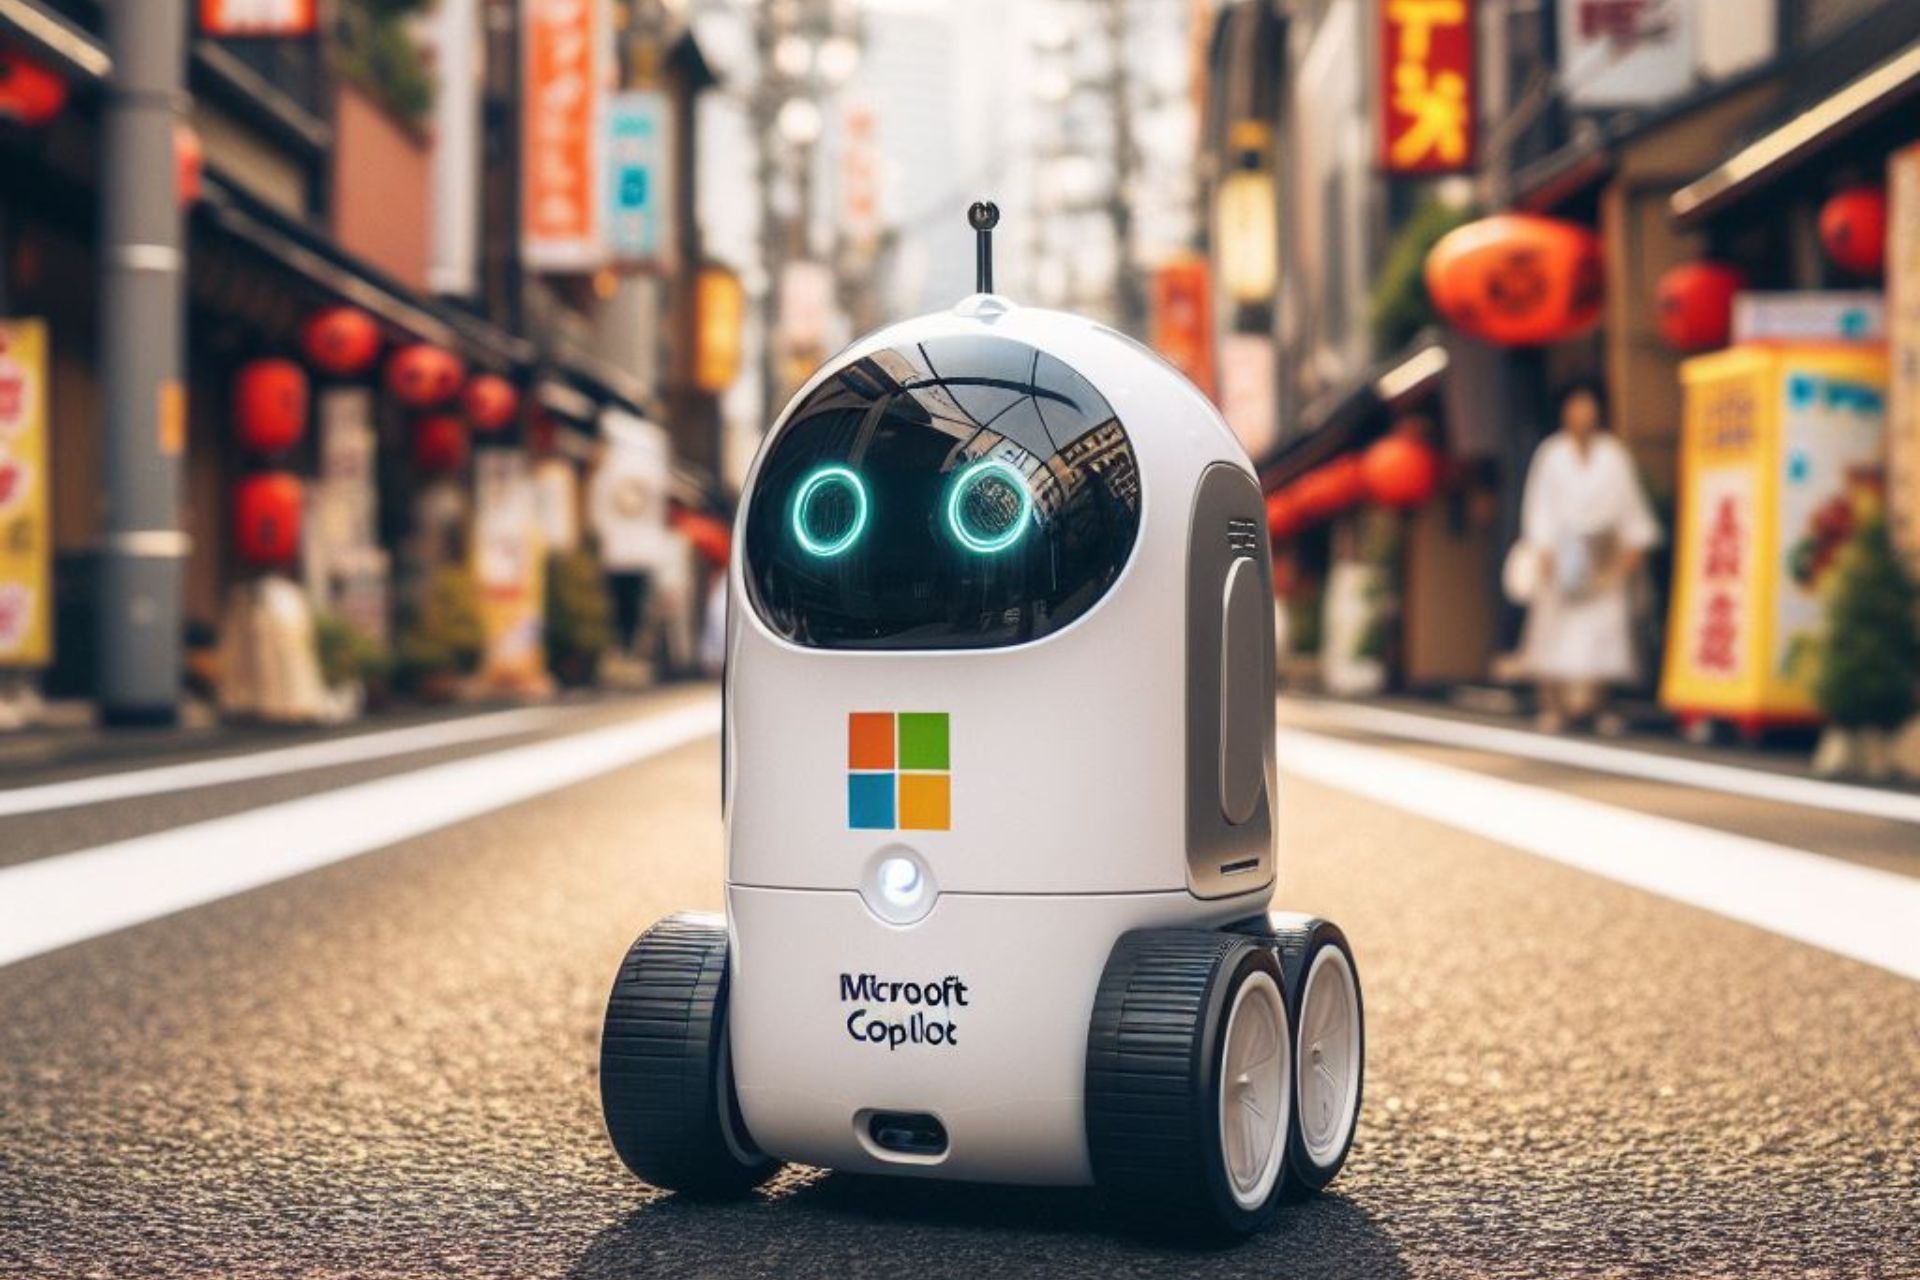 Microsoft Copilot roaming the streets of Japan after the investment